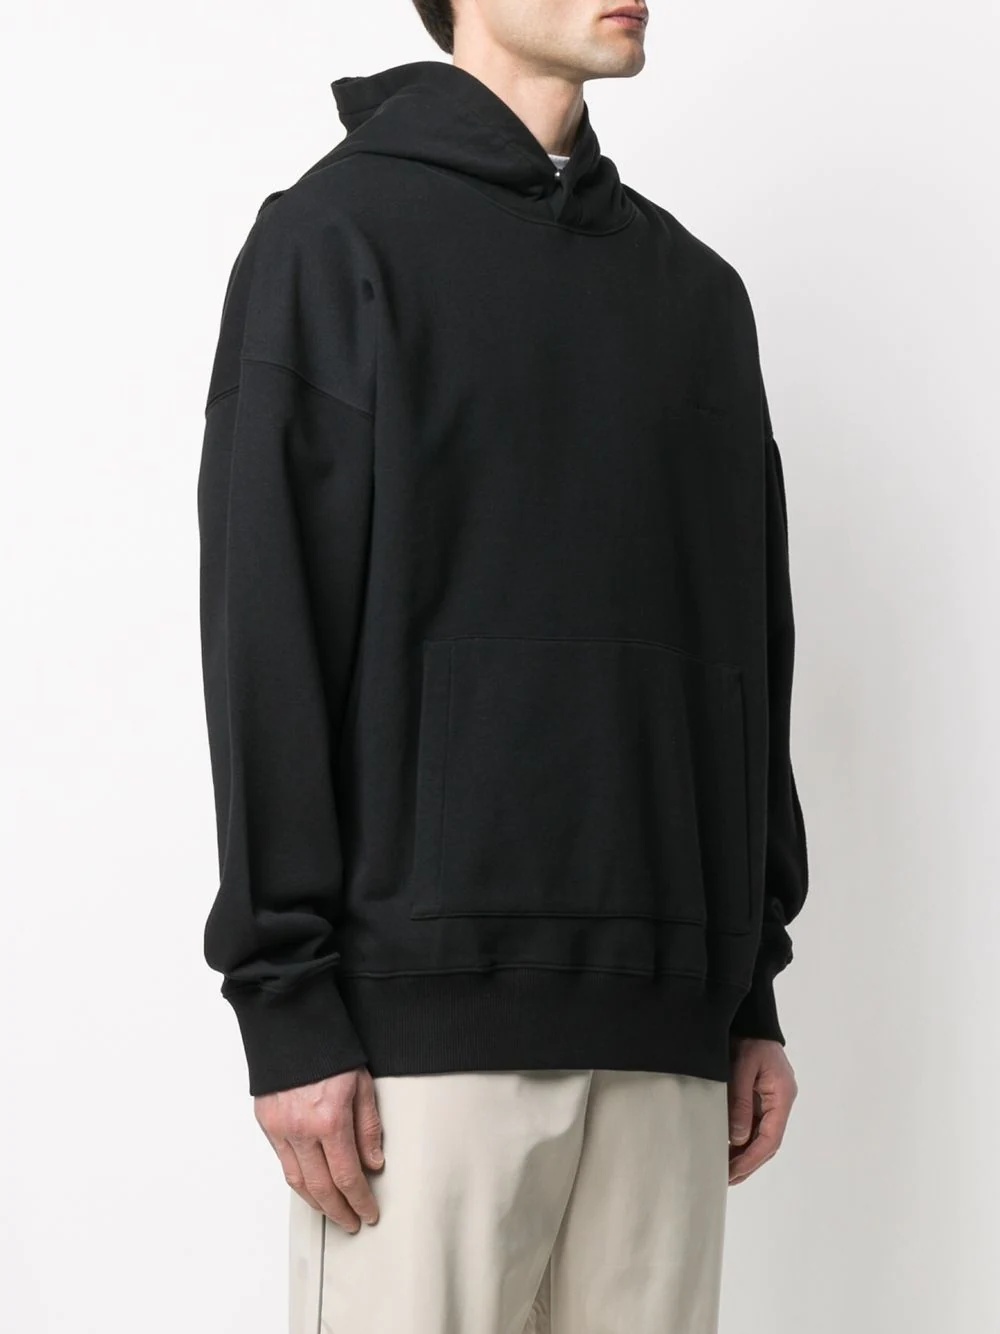 A-COLD-WALL* Dissection pullover hoodie | REVERSIBLE